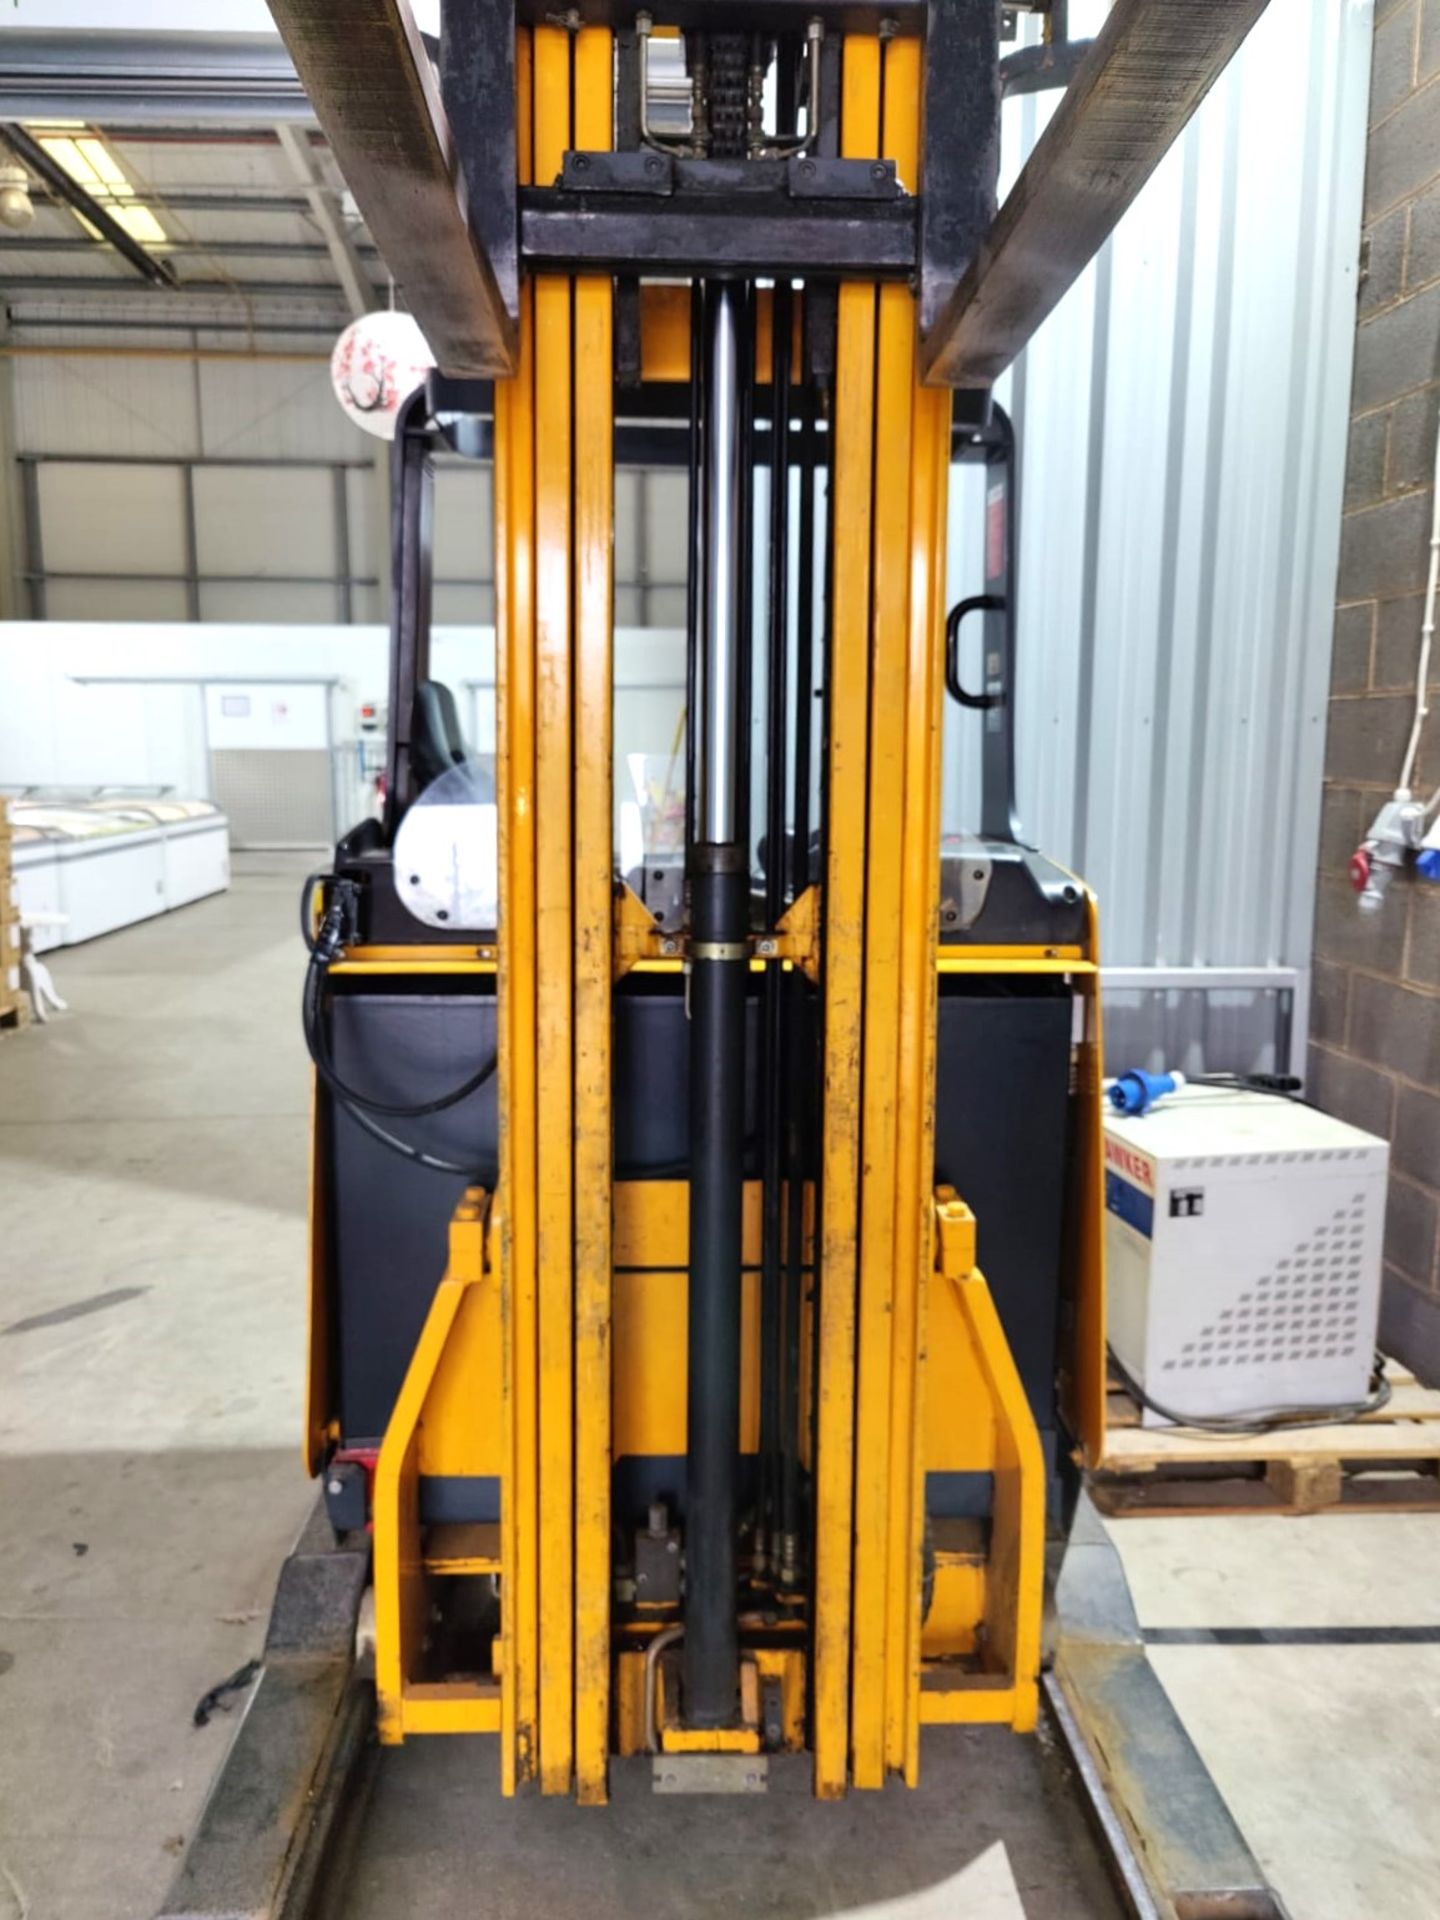 1 x Jungheinrich Electric Forklift Reach Truck - 1 Ton Capacity - 5900mm Lift Height - Image 19 of 36